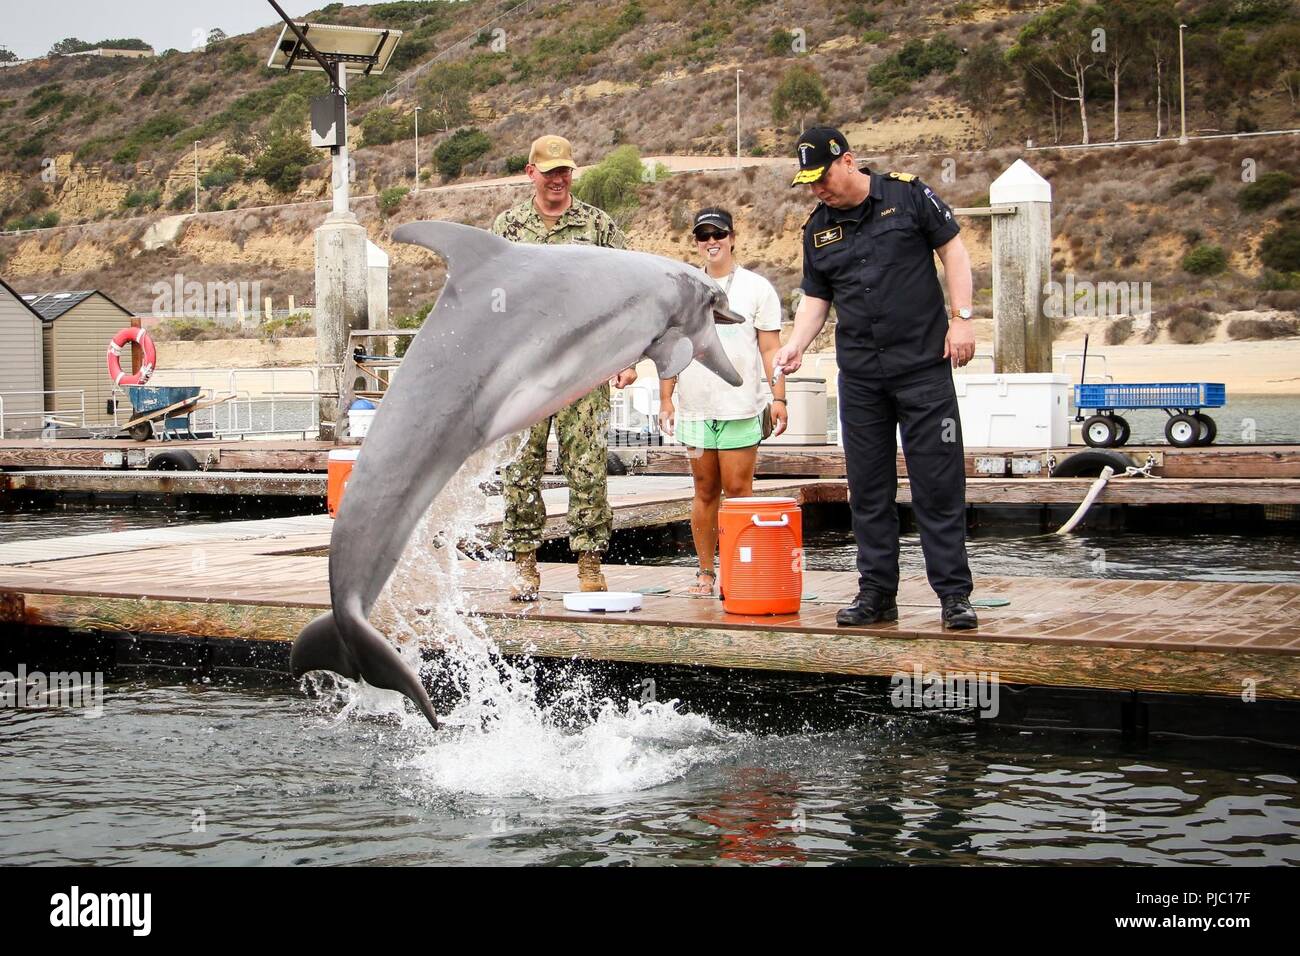 NAVAL BASE POINT LOMA, California (July 17, 2018)  Royal New Zealand Navy (RNZN) Commodore Tony Millar, maritime component commander and representative of the Chief of Navy (New Zealand), right, tosses a fish to a bottlenose dolphin from the Marine Mammals Systems Project during a visit onboard Naval Base Point Loma. Twenty-five nations, 46 ships, five submarines, about 200 aircraft and 25,000 personnel are participating in RIMPAC from June 27 to Aug. 2 in and around the Hawaiian Islands and Southern California. The world’s largest international maritime exercise, RIMPAC provides a unique trai Stock Photo